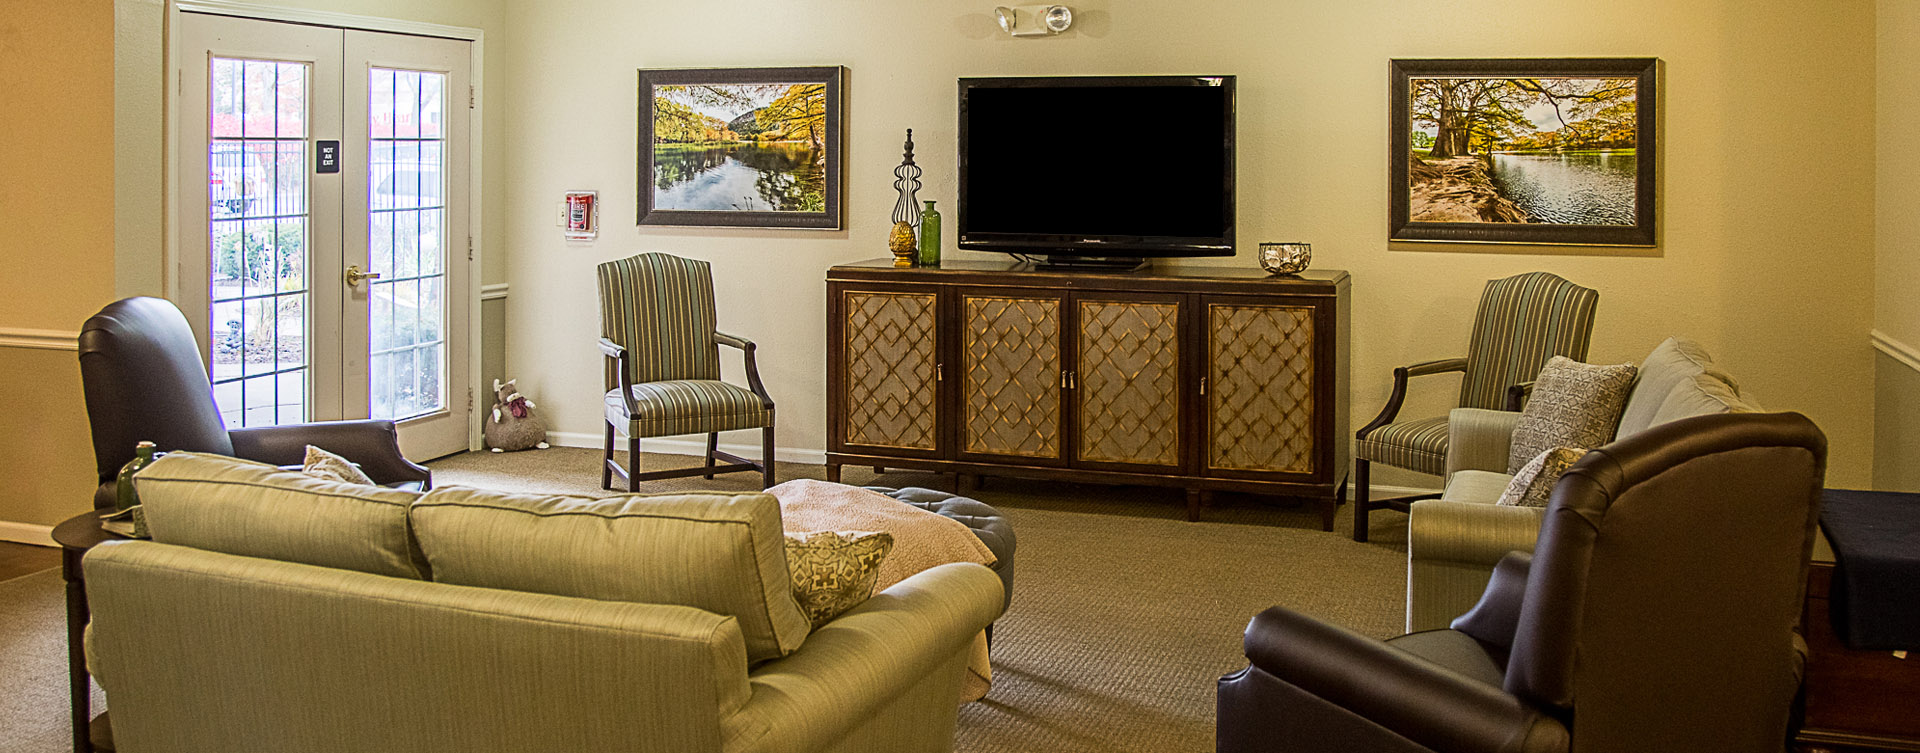 Residents can enjoy furniture covered in cozy fabrics in the Mary B’s living room at Bickford of Davenport